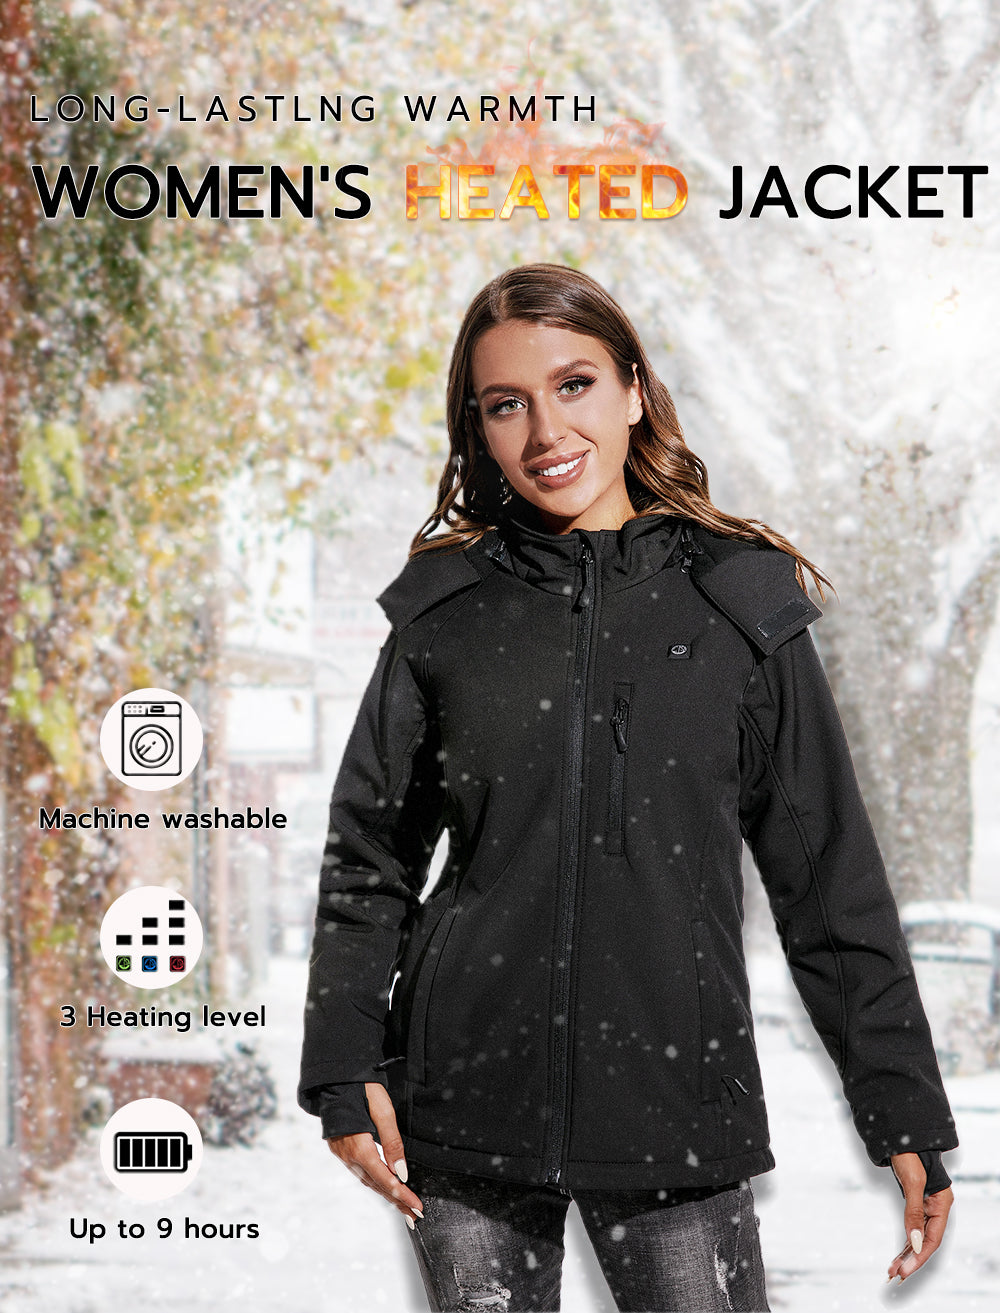 Sailwind Women's Soft Shell Heated Jacket with Detachable Hood and Battery Pack